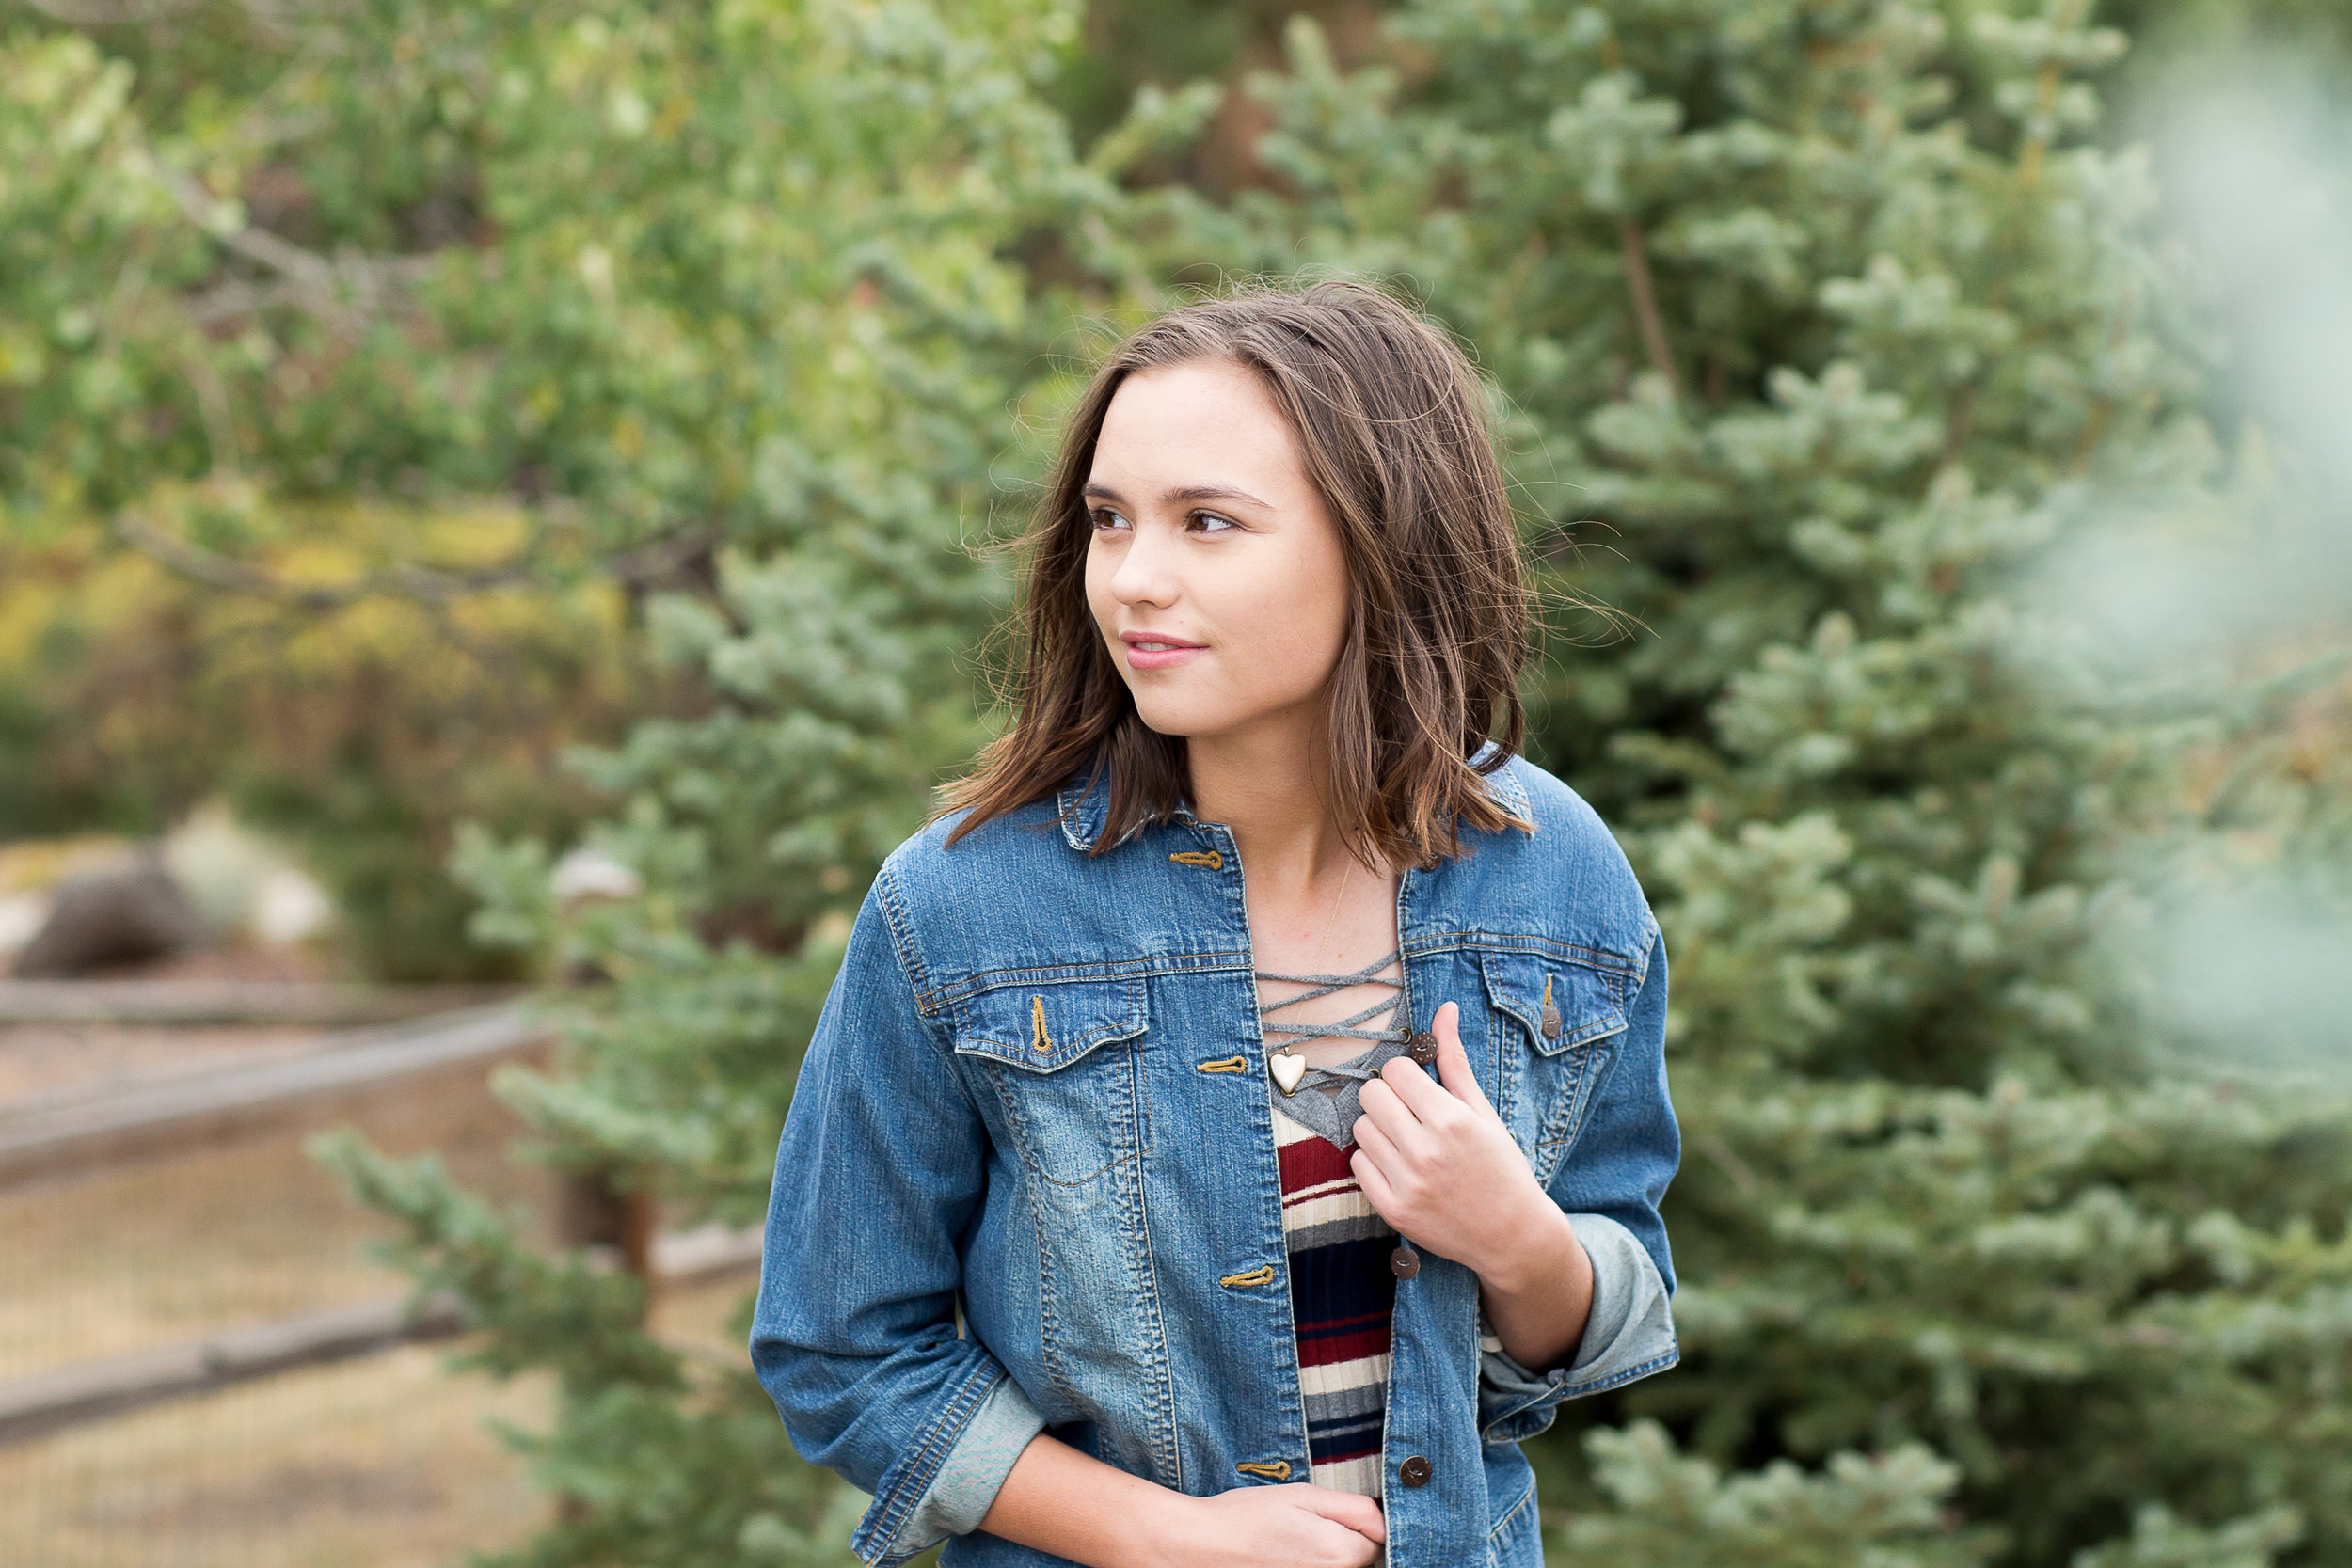 Colorado Springs Senior Photography | Doherty High School | Stacy Carosa Photography | Senior girl smiling at camera among fall colors during her senior session in Colorado Springs